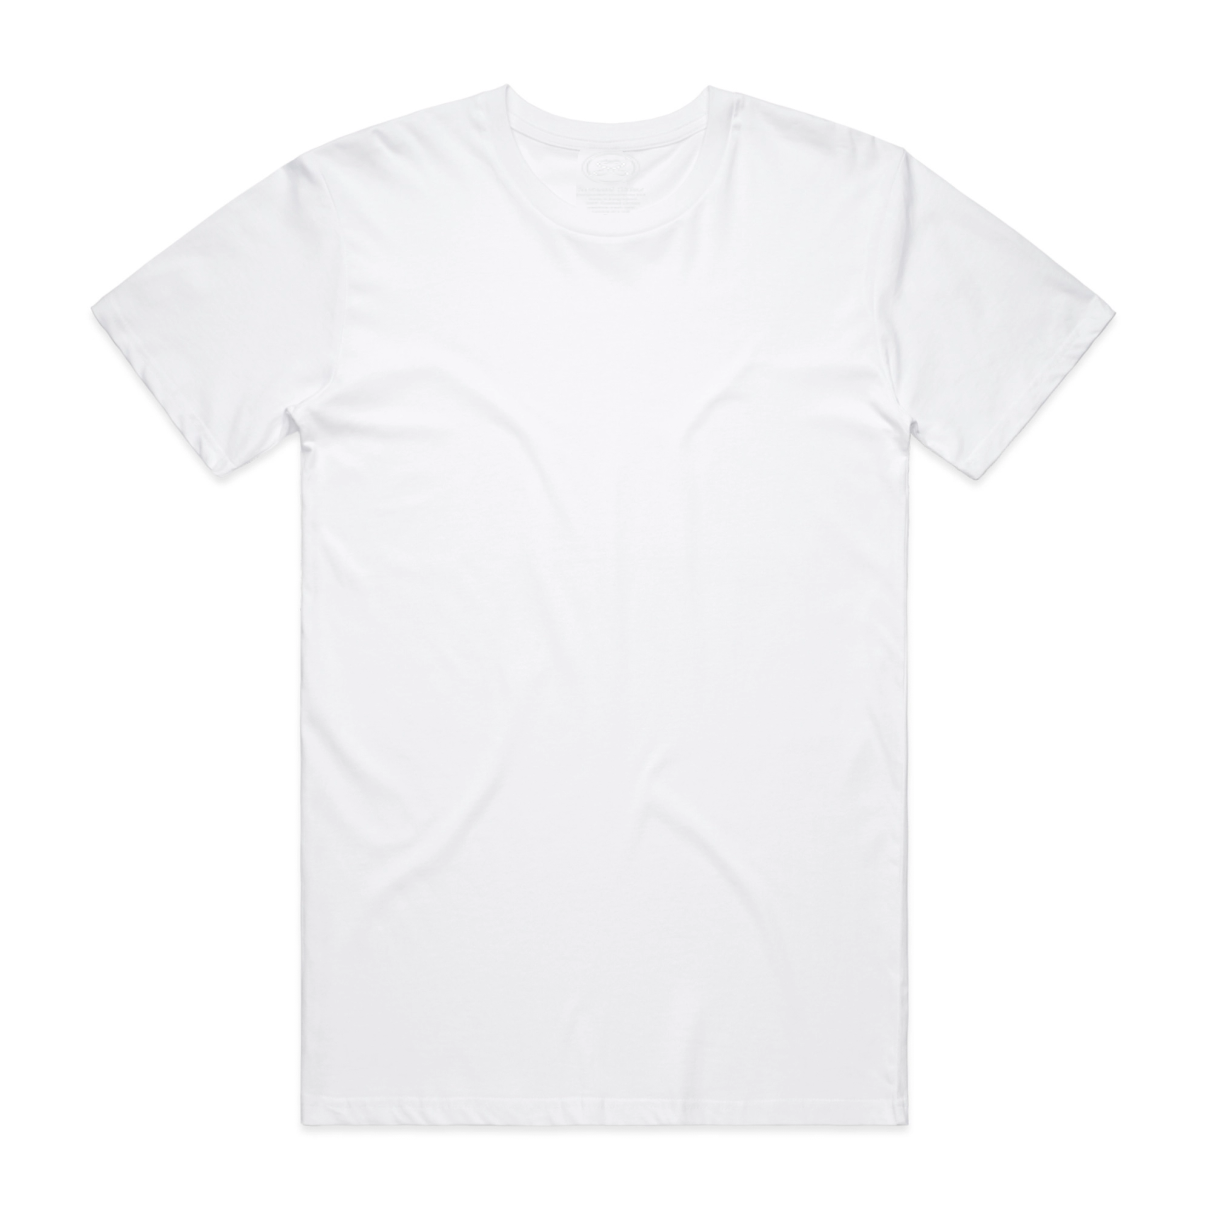 Men's Iconic Classic Lightweight T-Shirt in several colors